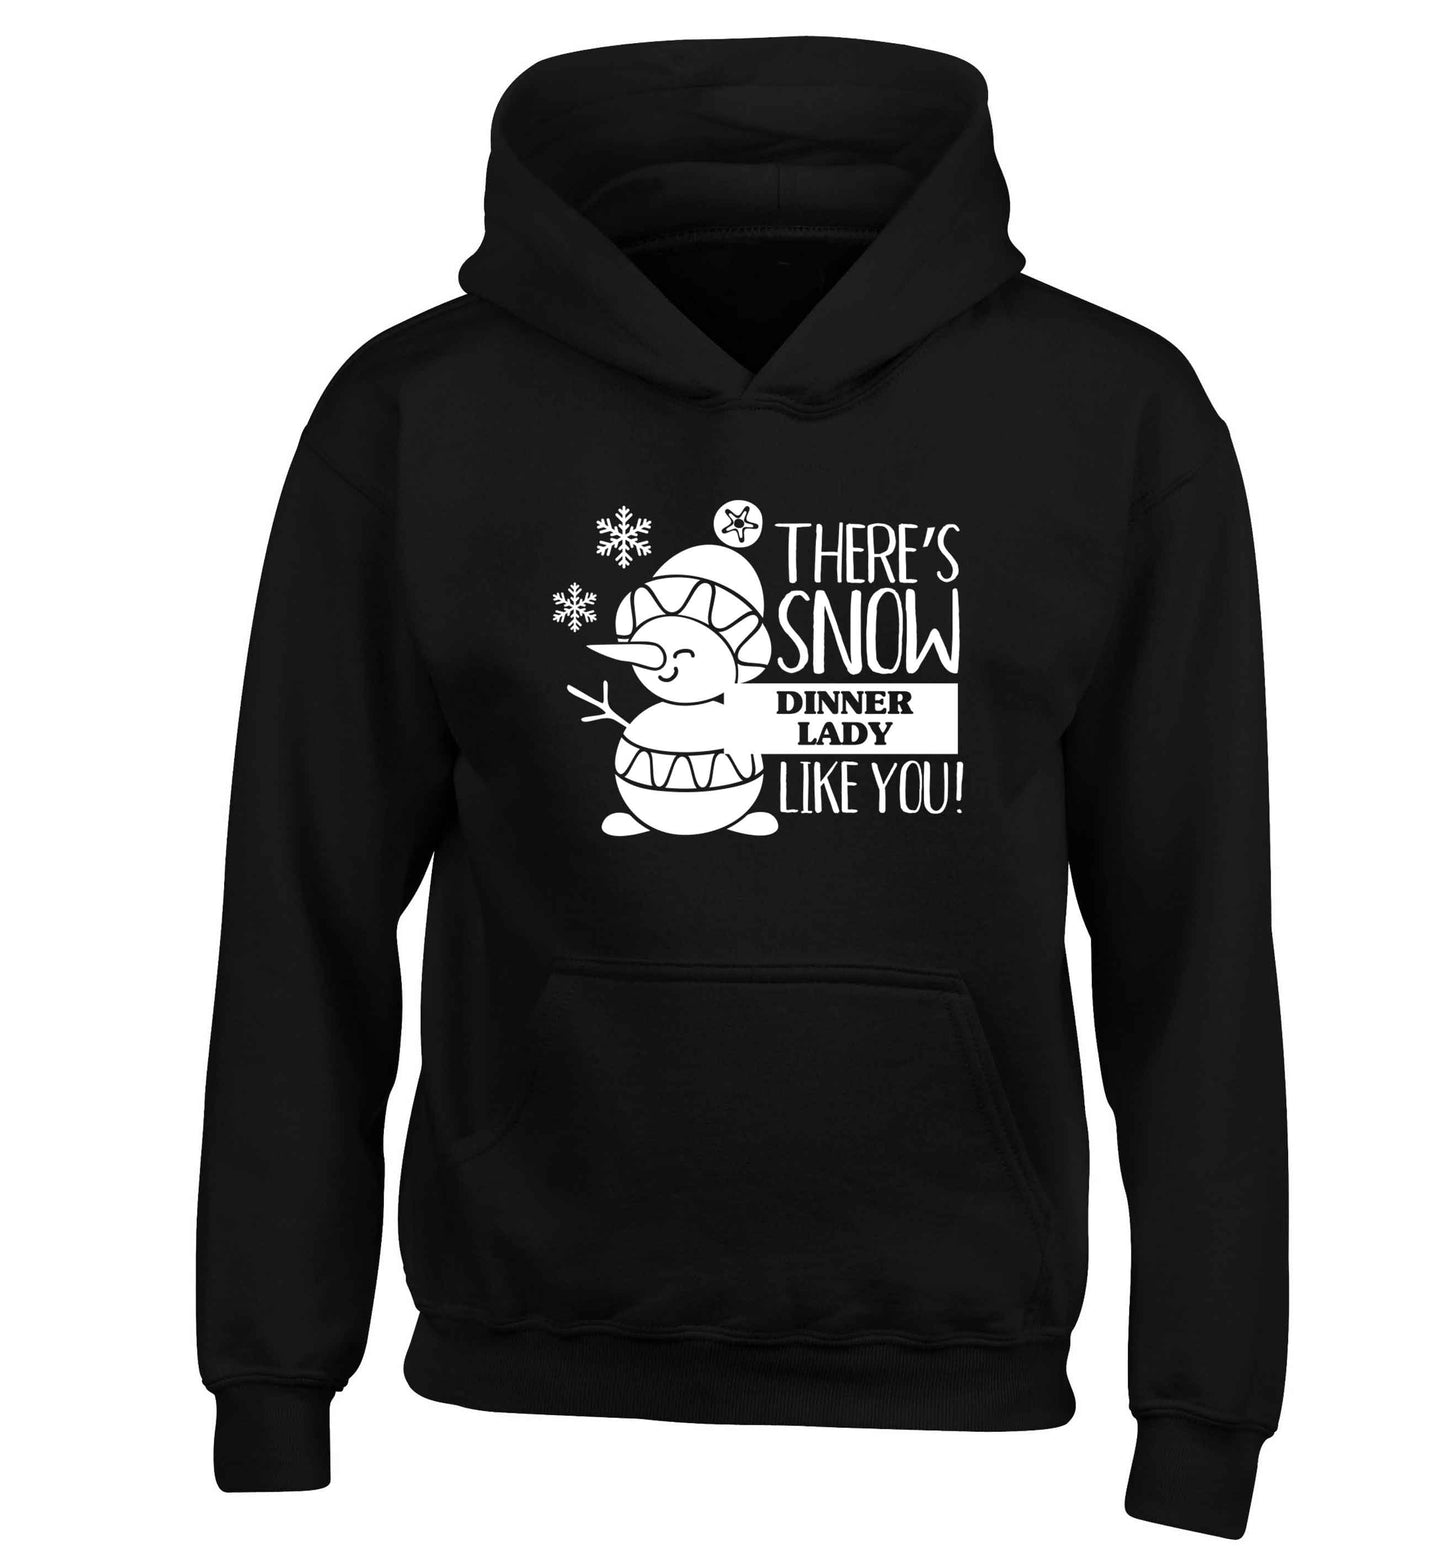 There's snow dinner lady like you children's black hoodie 12-13 Years